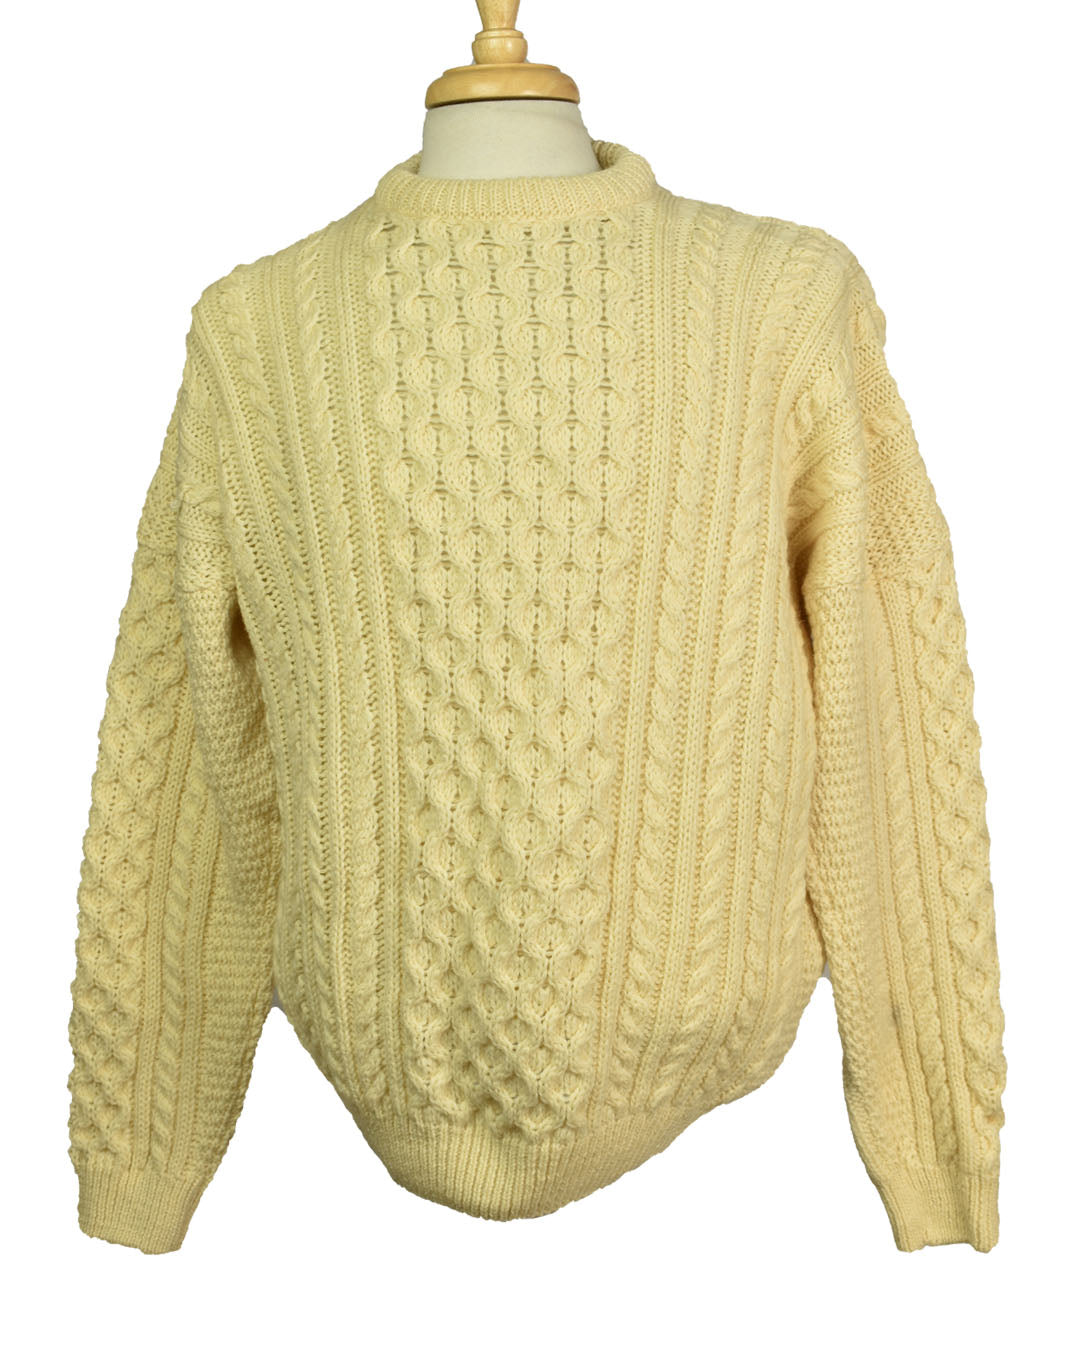 Vintage Irish Knit Fisherman Cable Sweater Made in England Size L